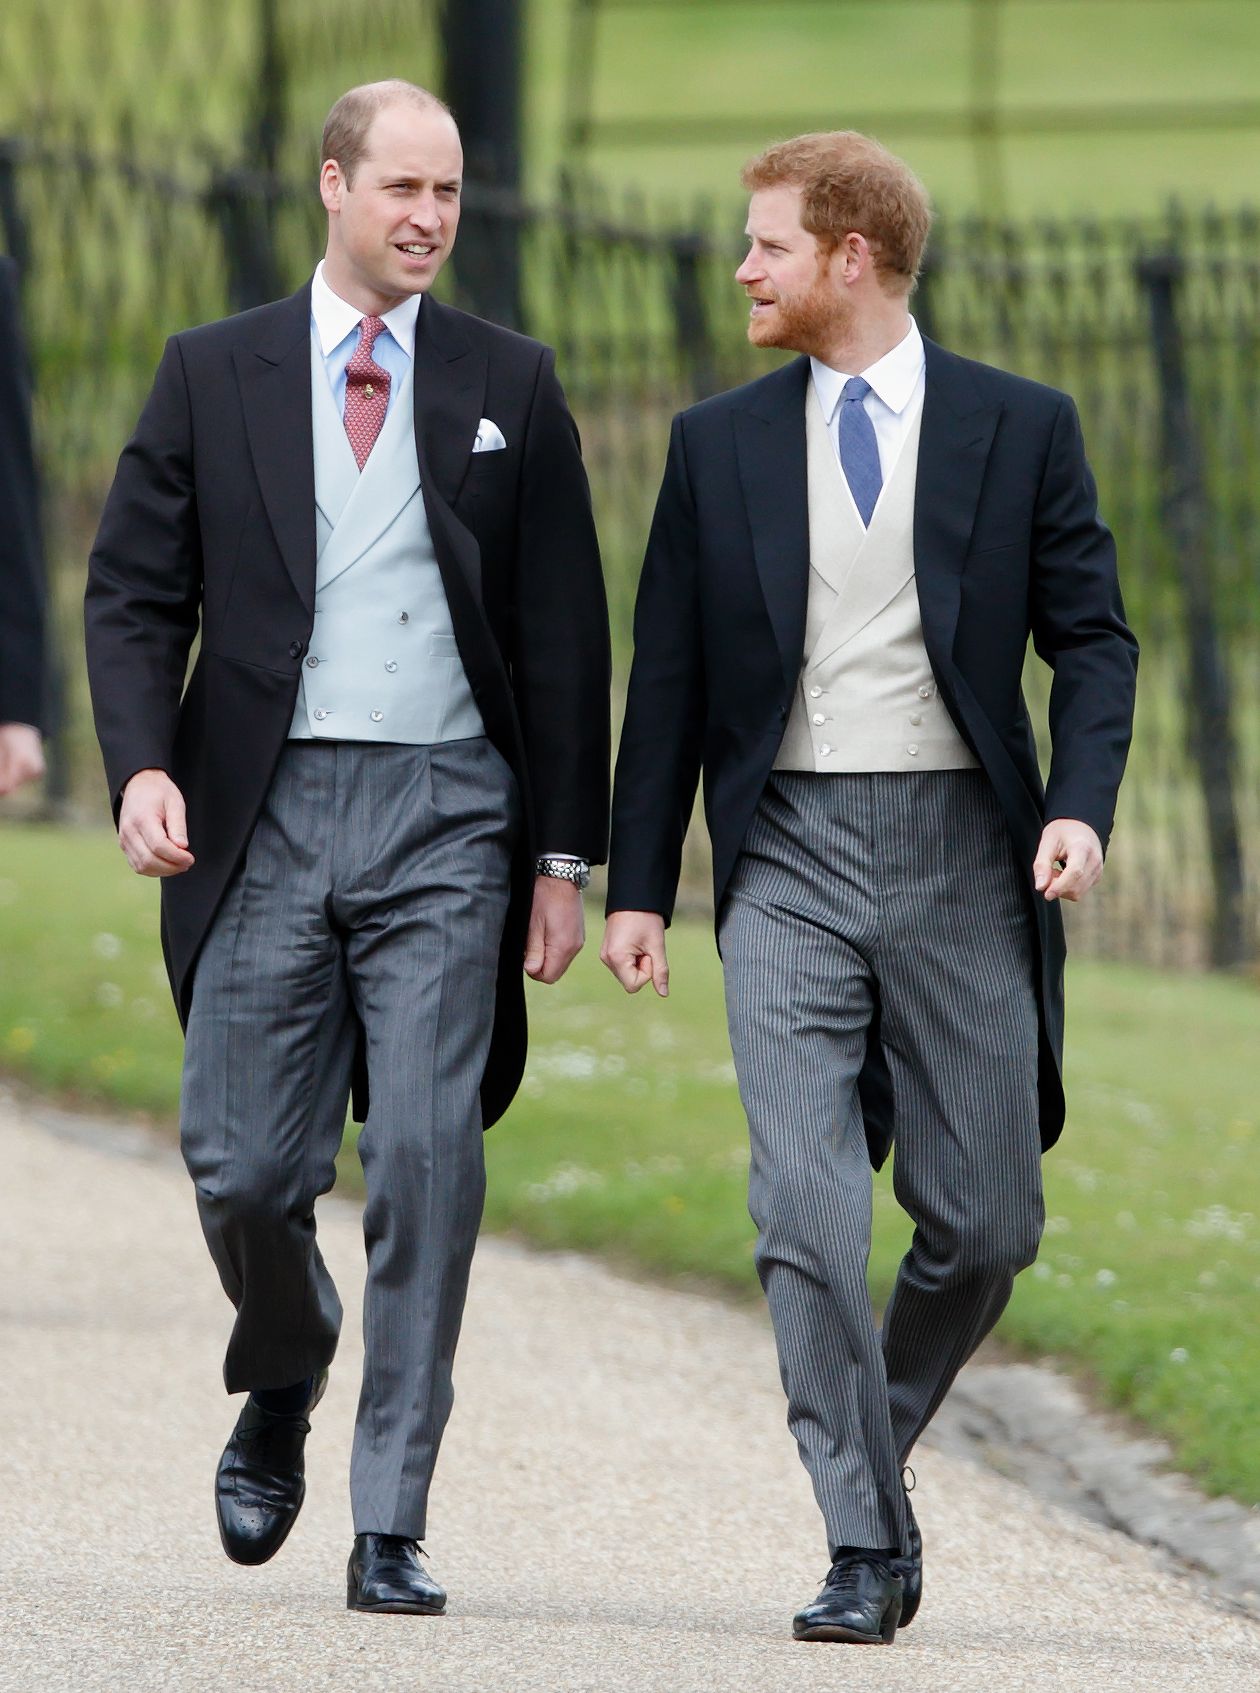 Prince Harry flashes his pants as he launches selection process for  Invictus Games - Mirror Online